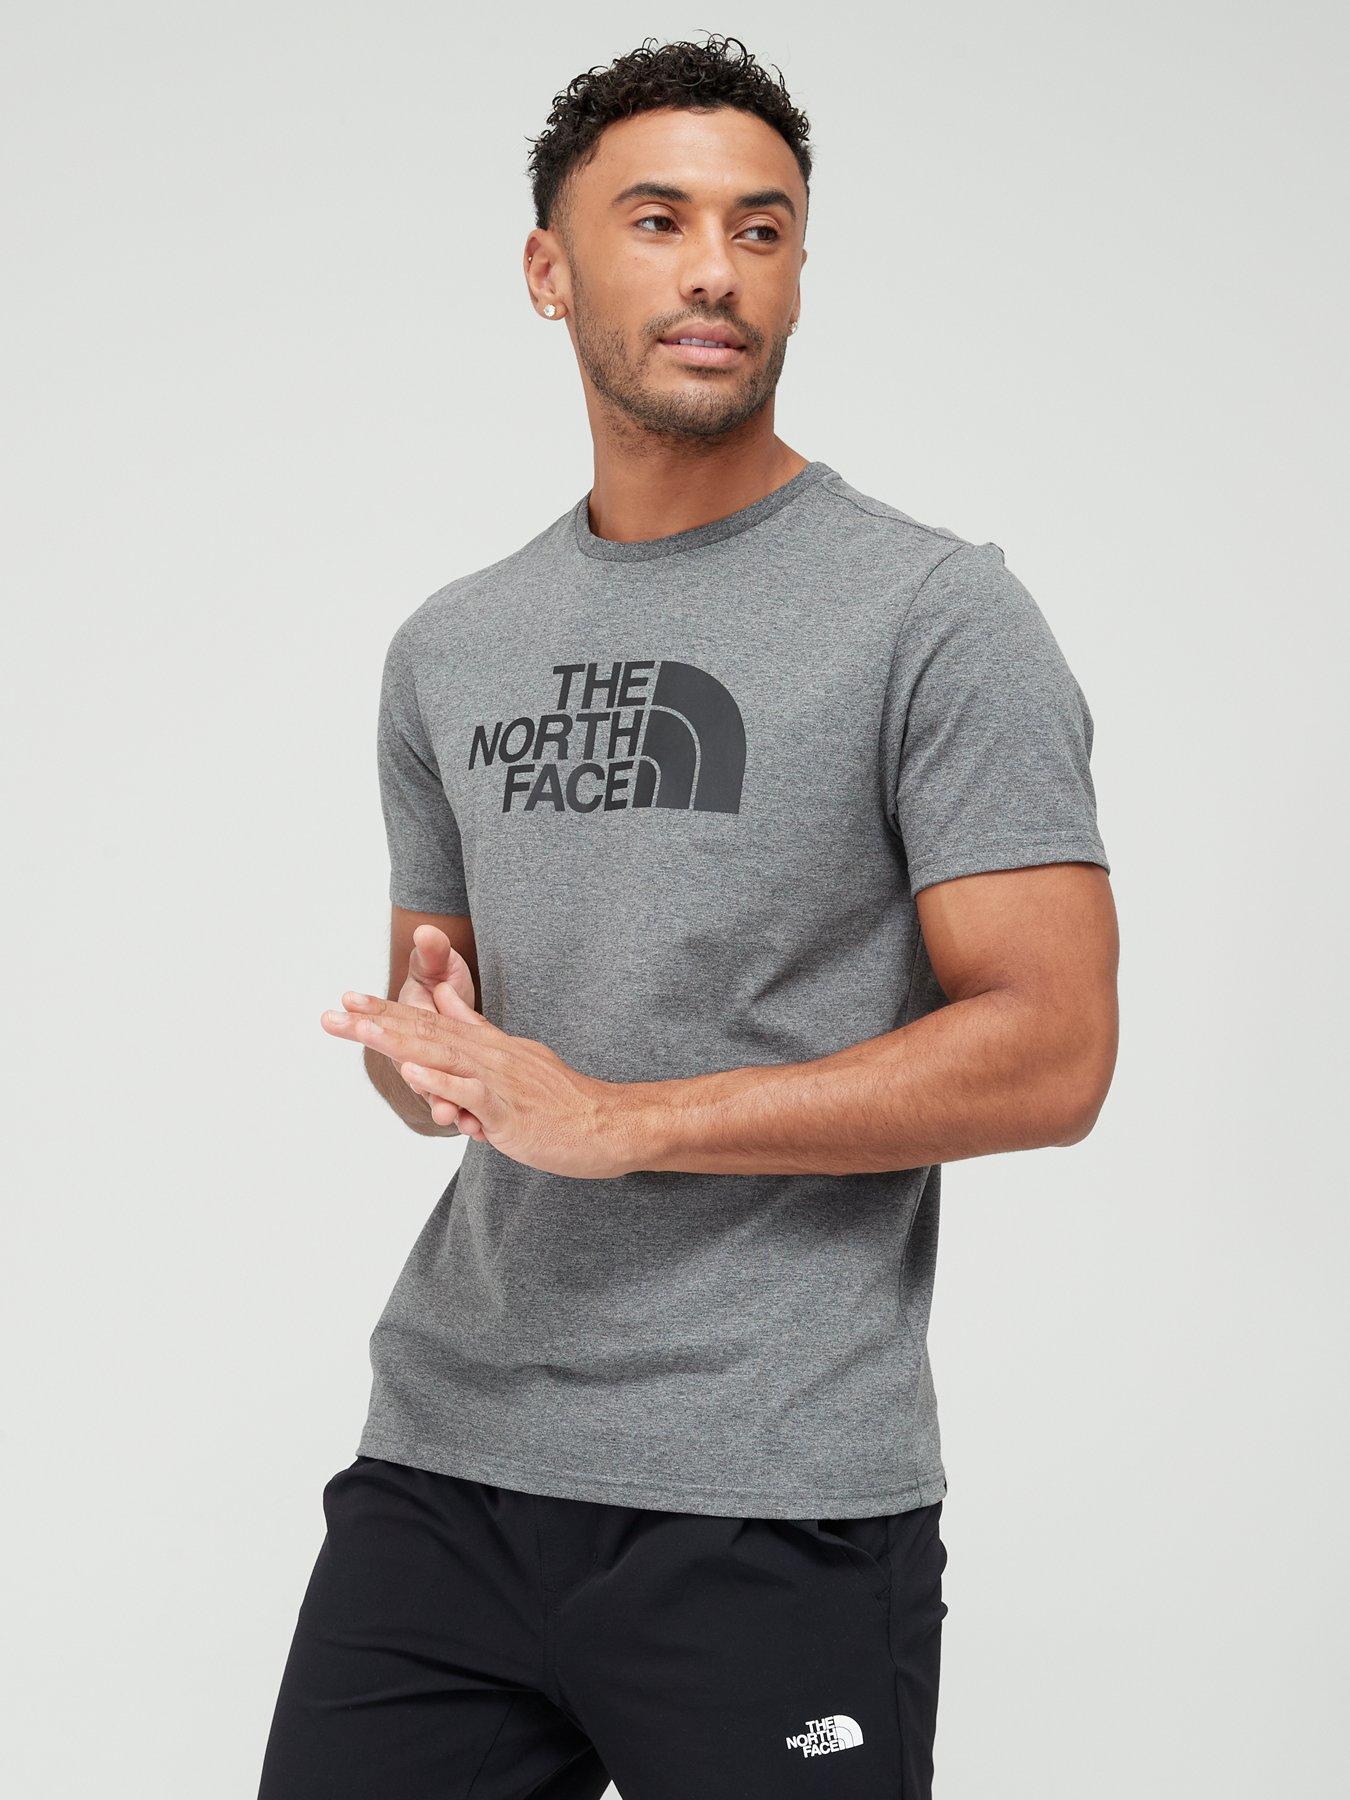 the north face mens tops